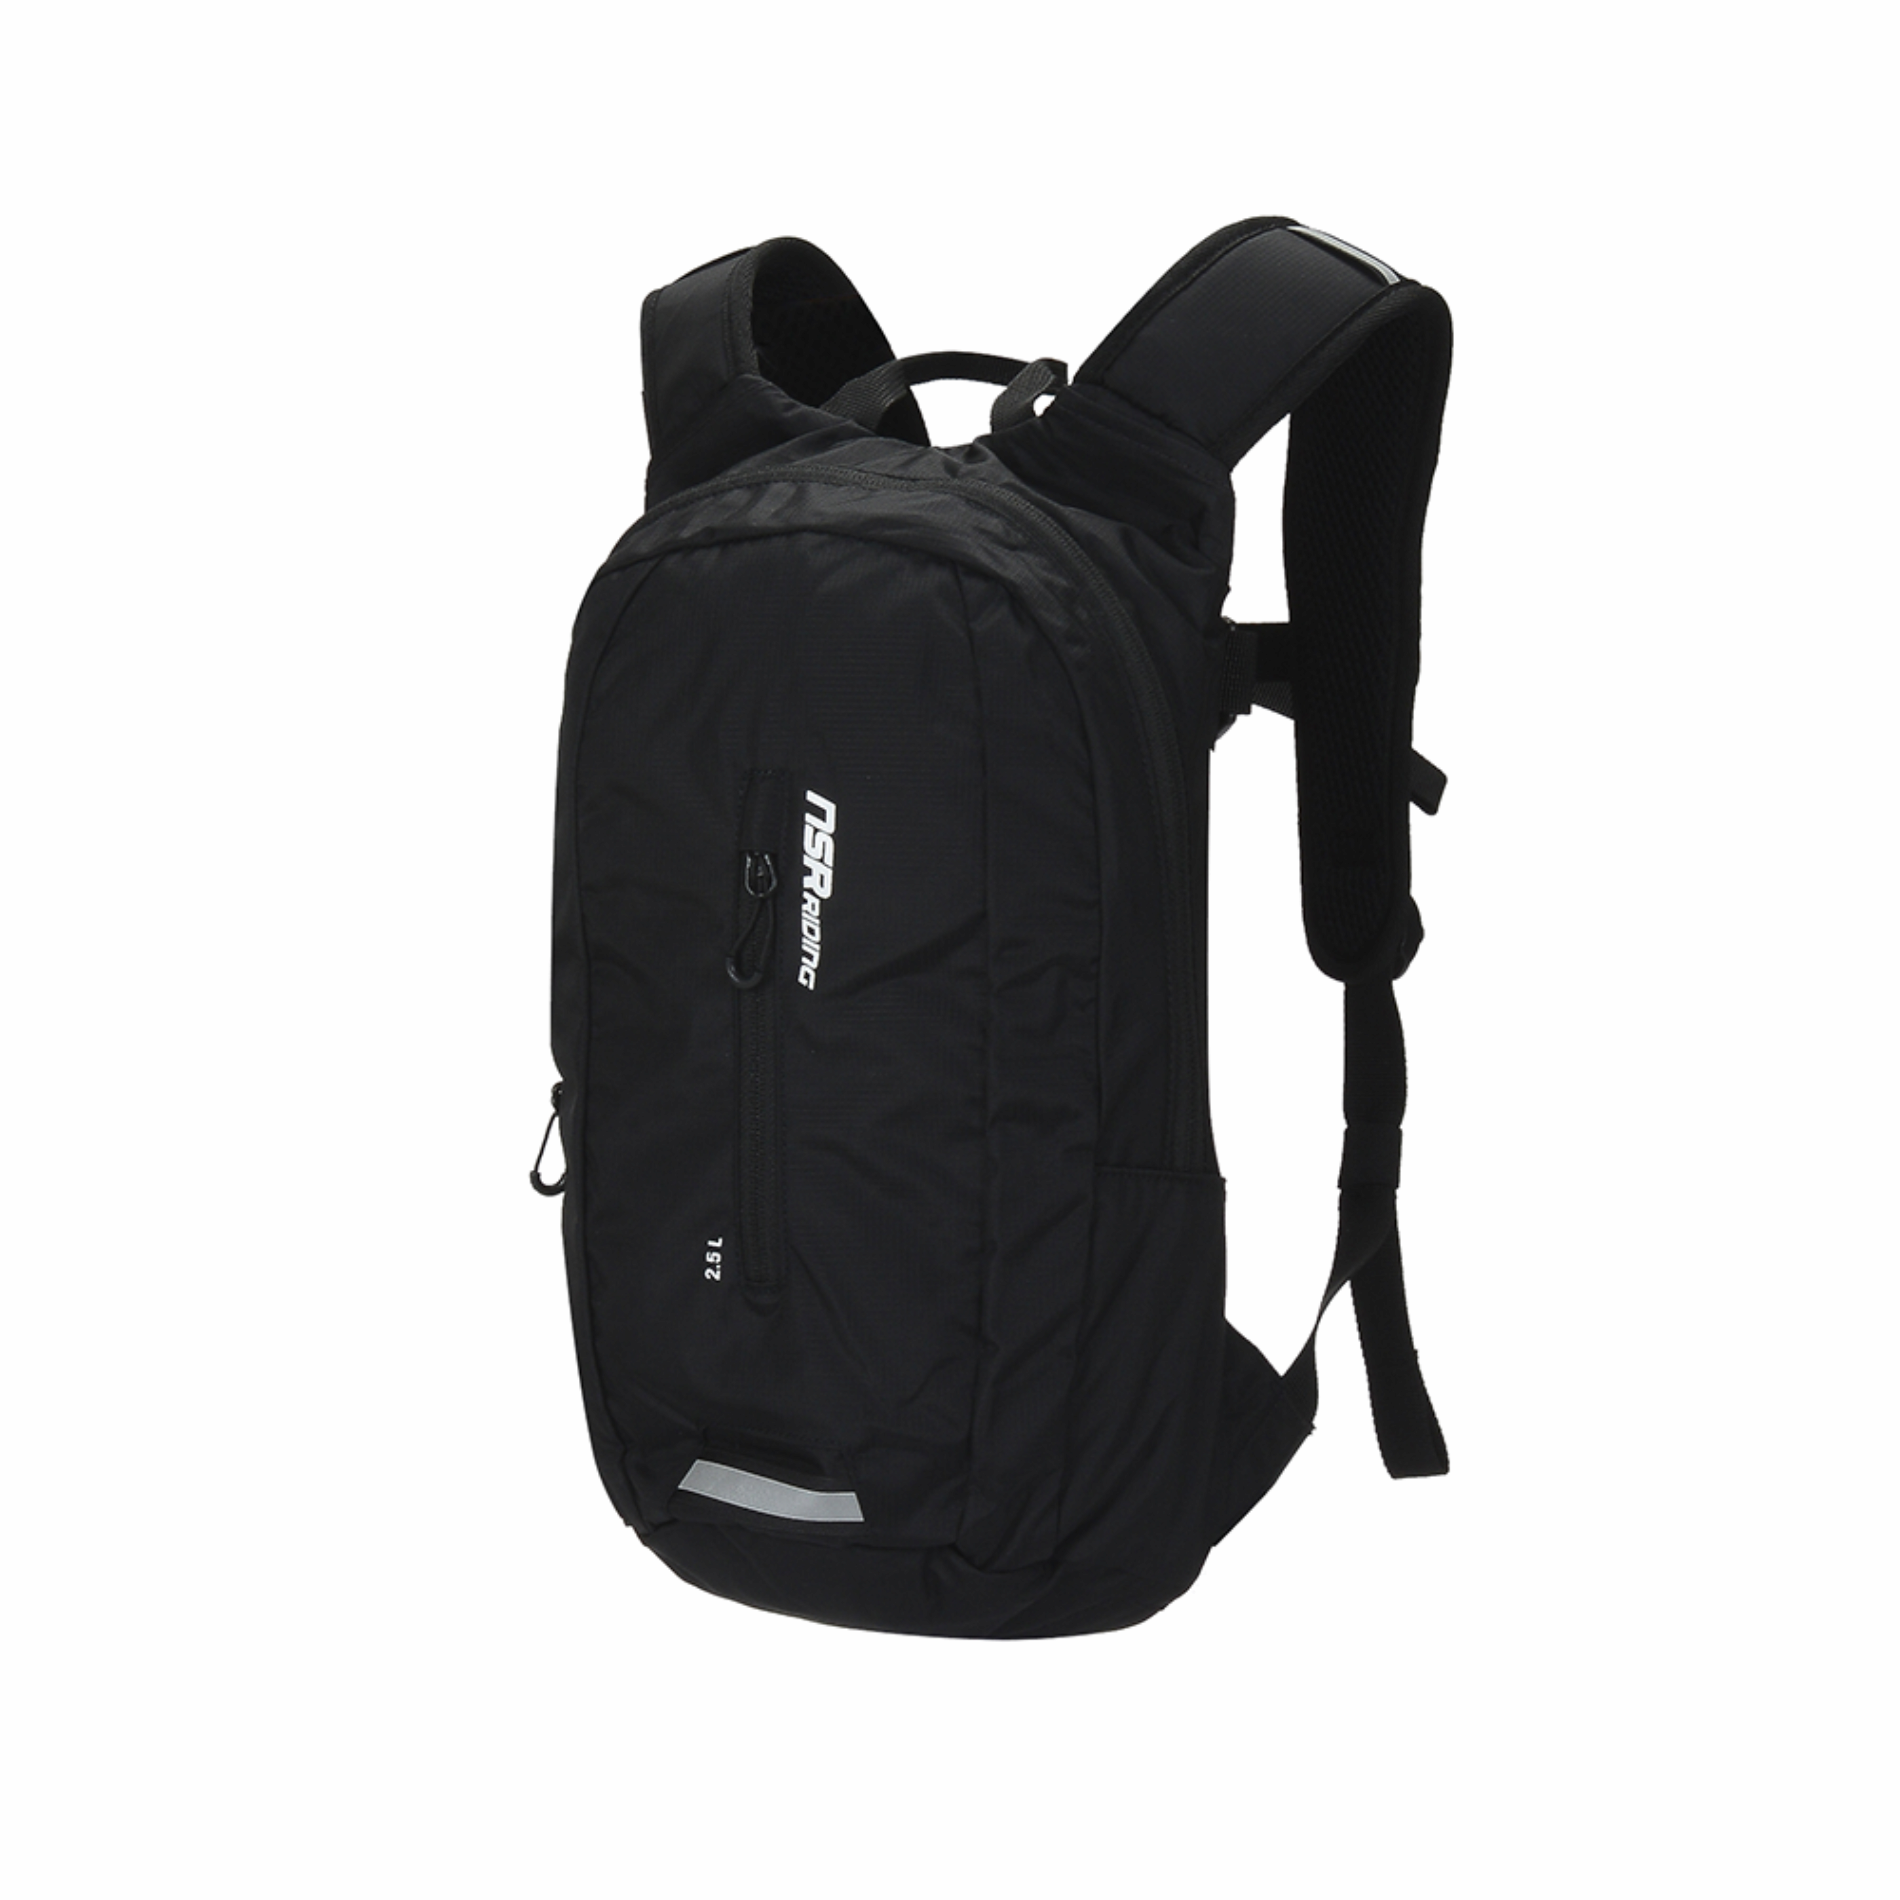 NSR ALL NEW ONEDAY BACKPACK